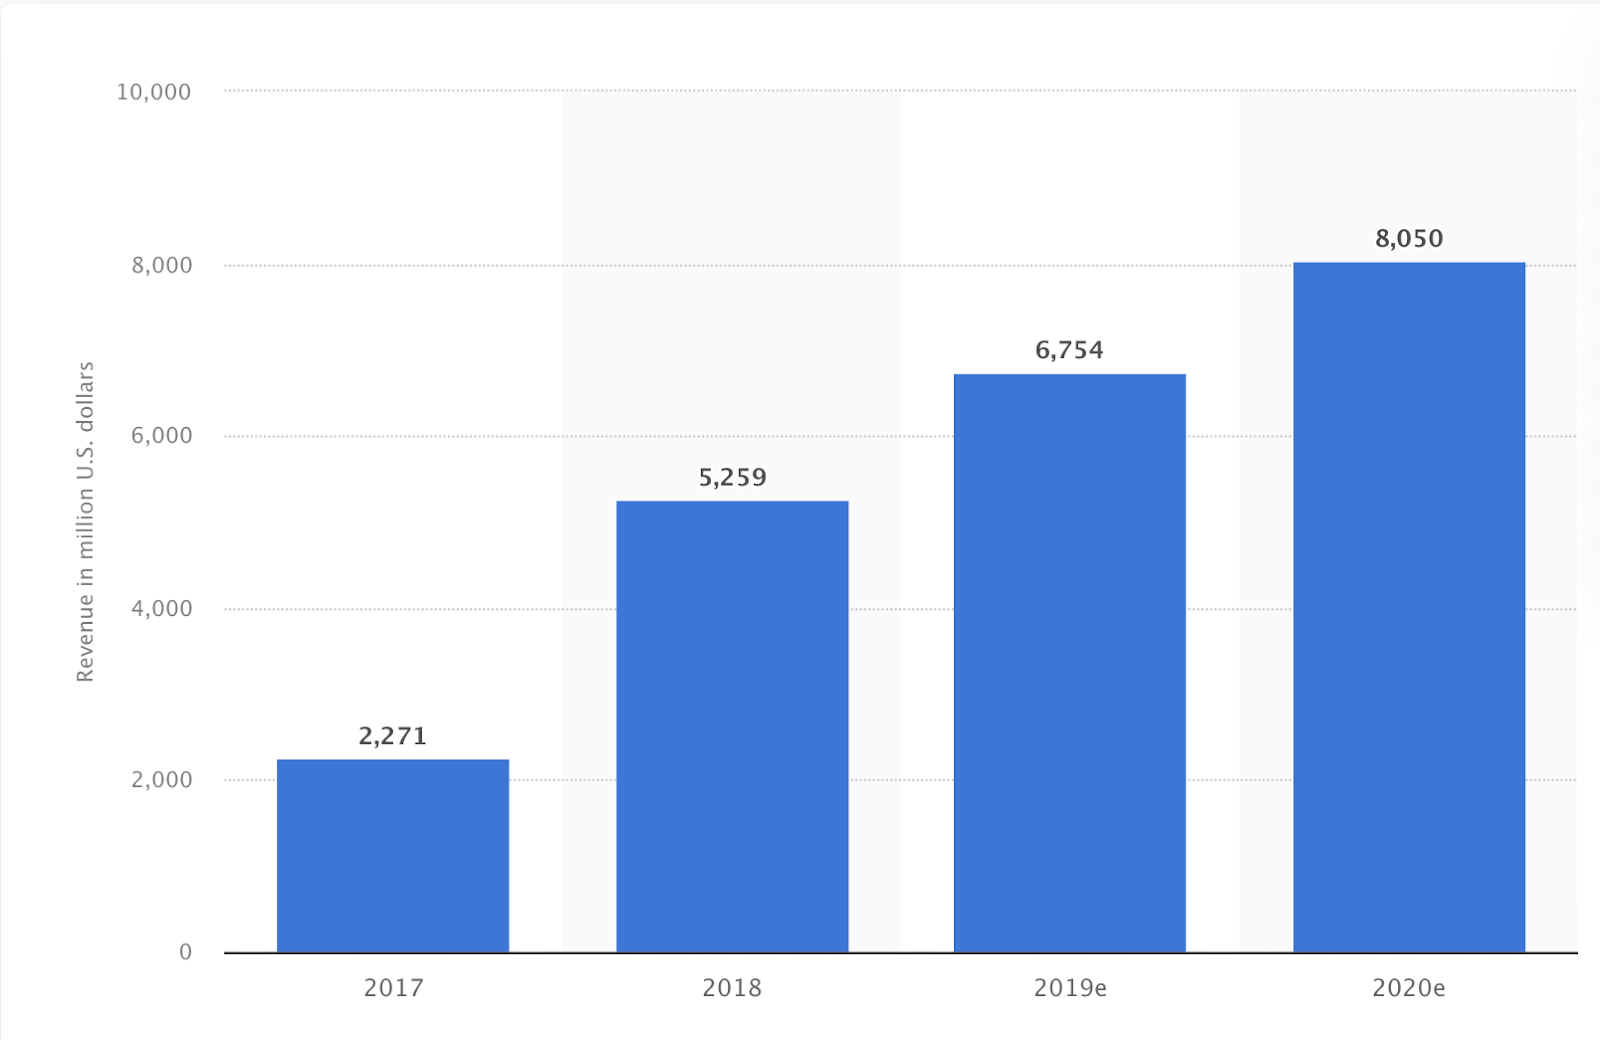 LinkedIn’s annual revenue from 2017 to 2020